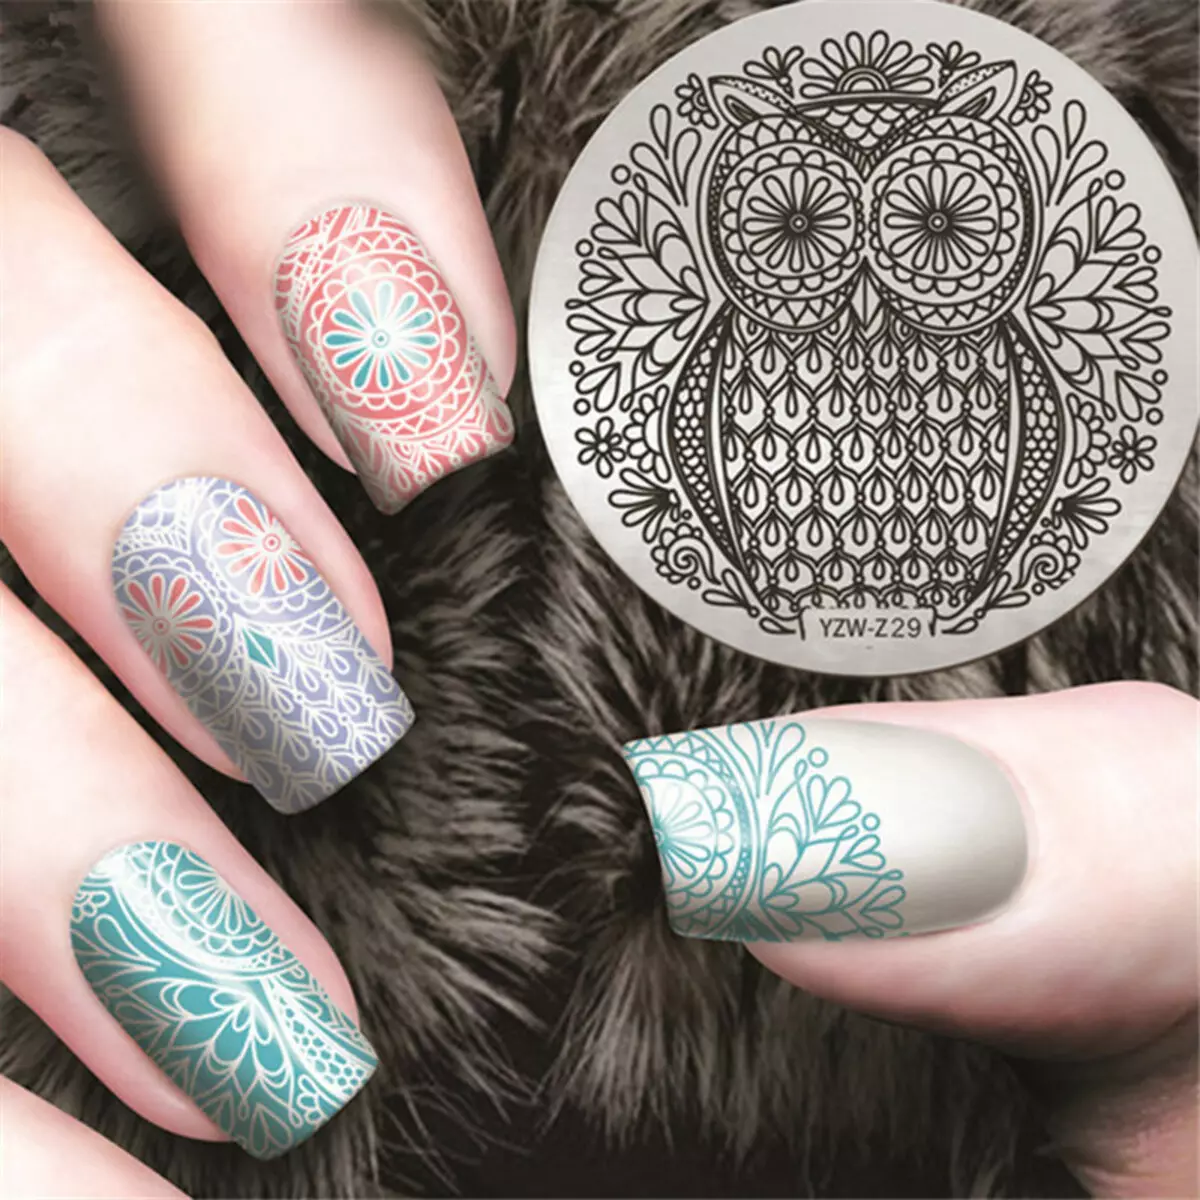 Manicure with owls (63 photos): Best design ideas on nails with drawings 6412_18